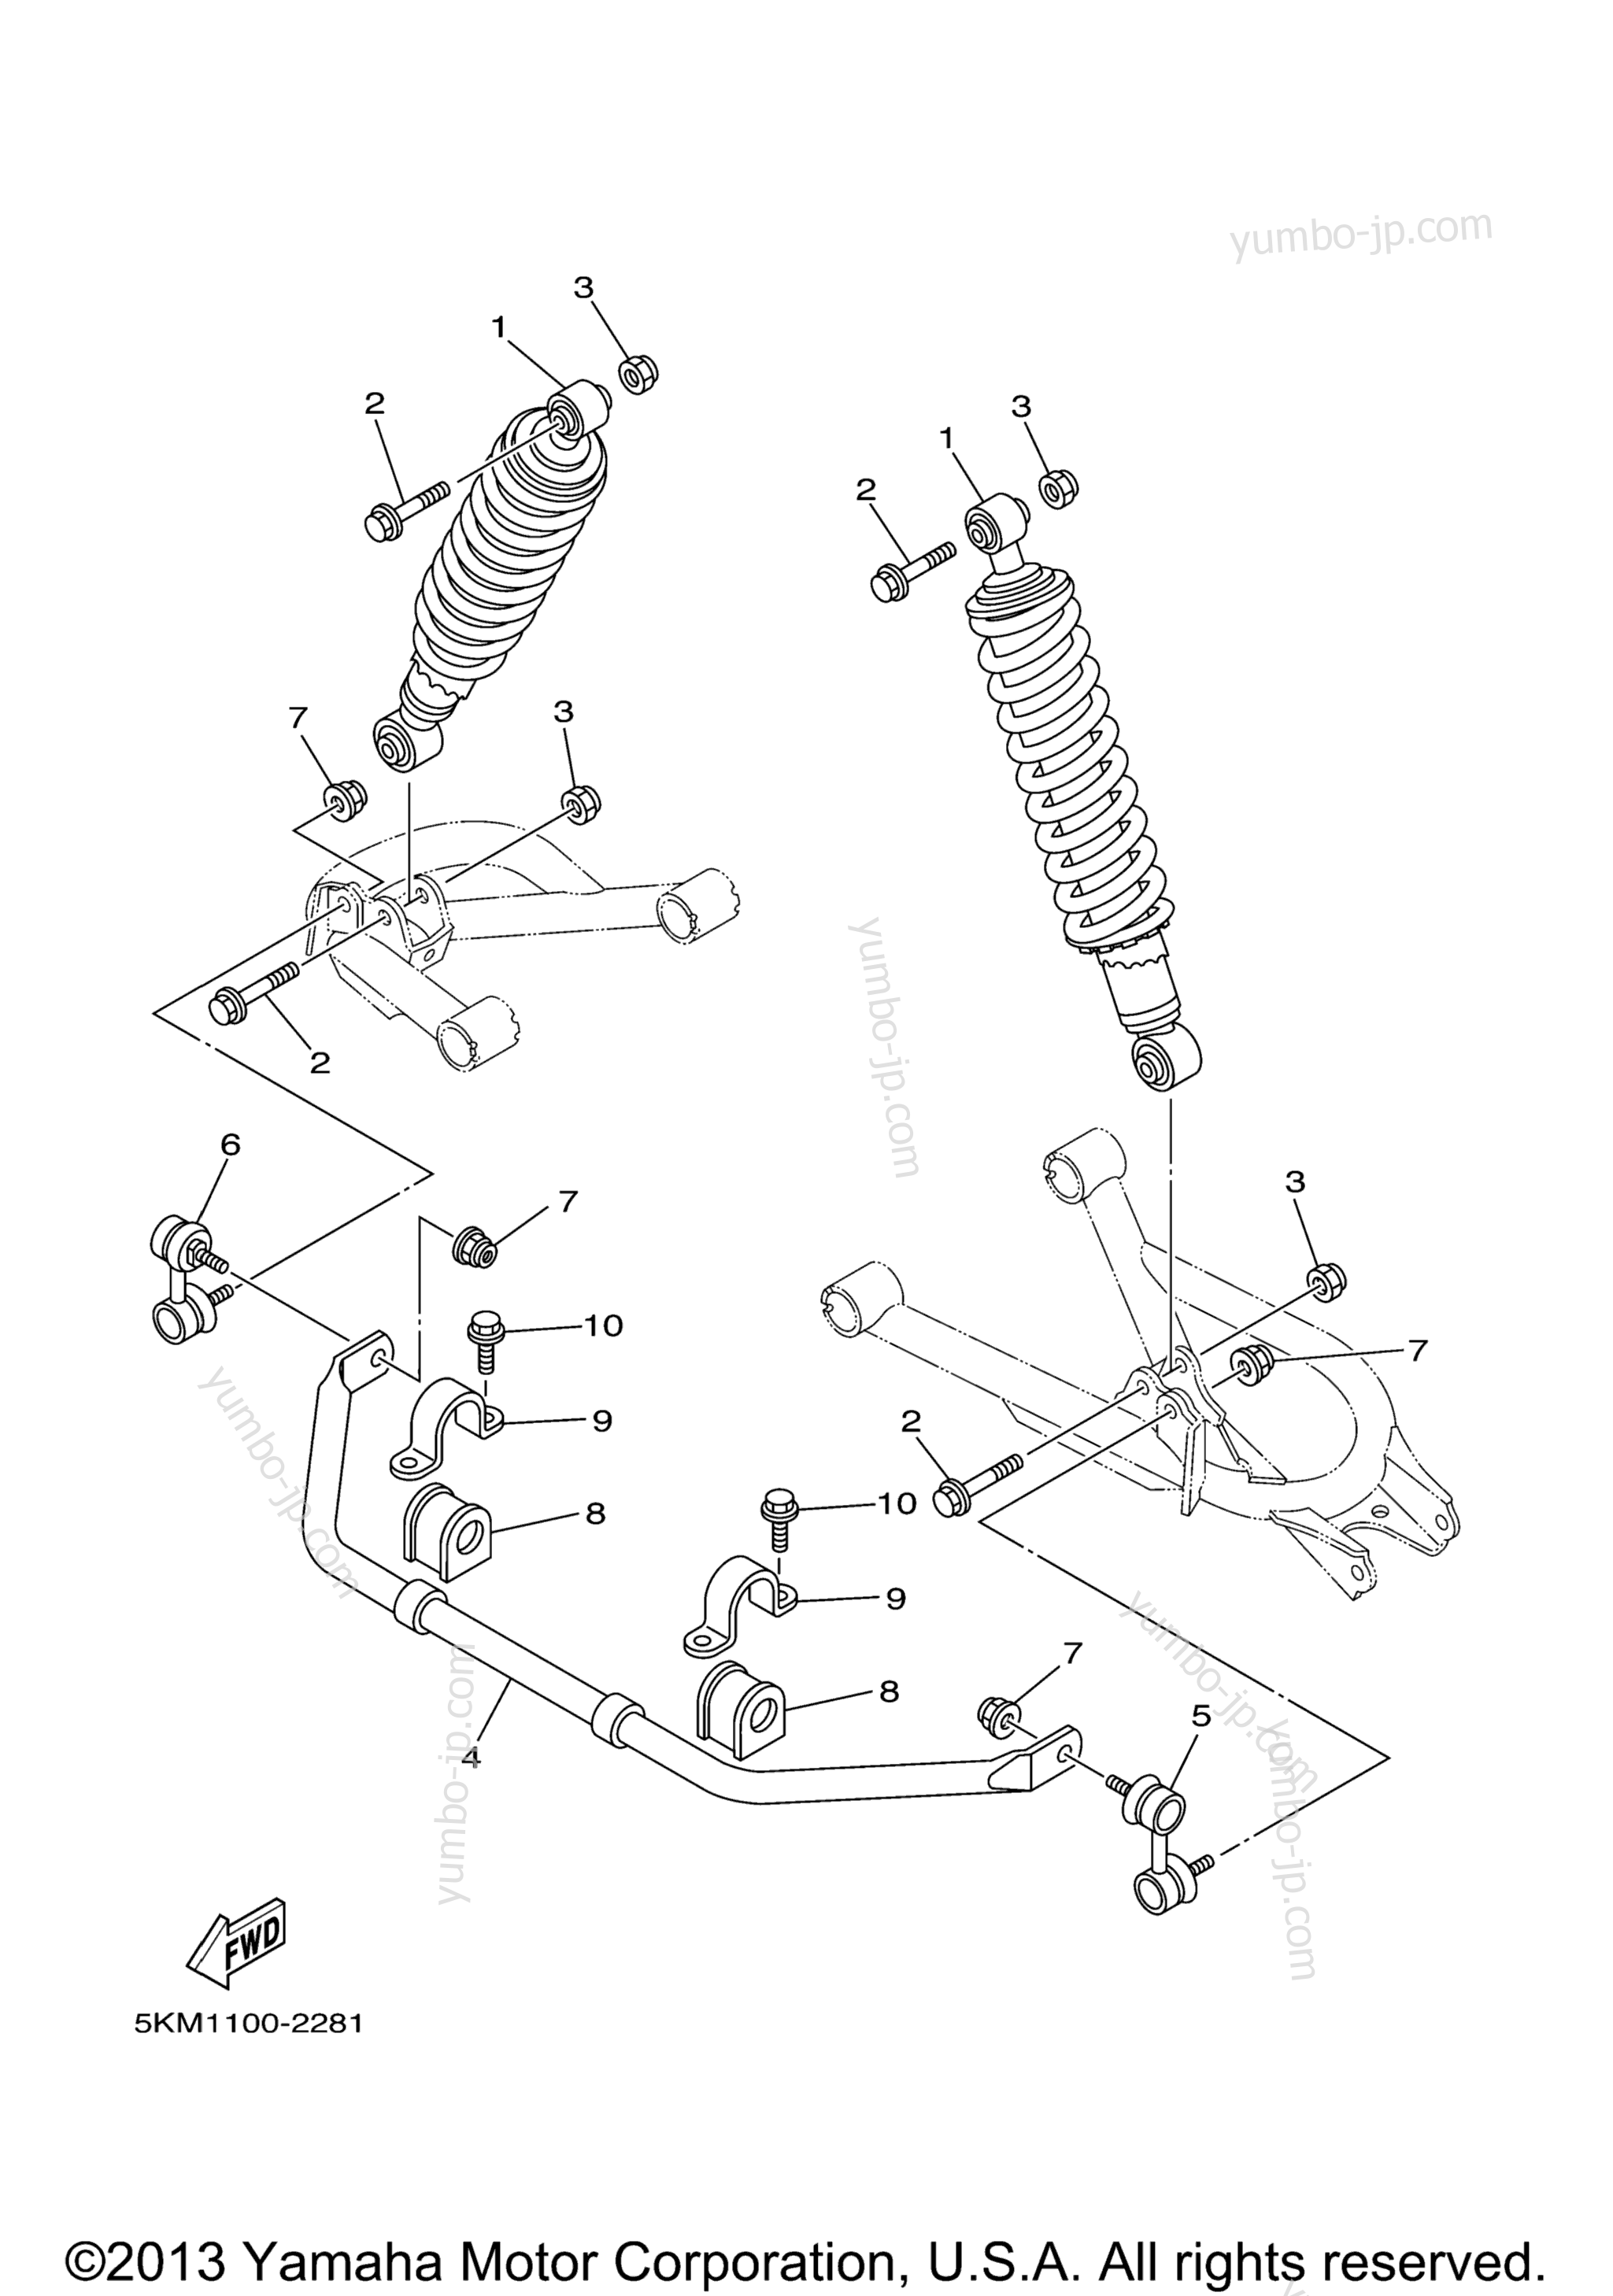 Rear Suspension for ATVs YAMAHA GRIZZLY 660 WETLANDS HUNTER EDITION (YFM660FHR) 2003 year